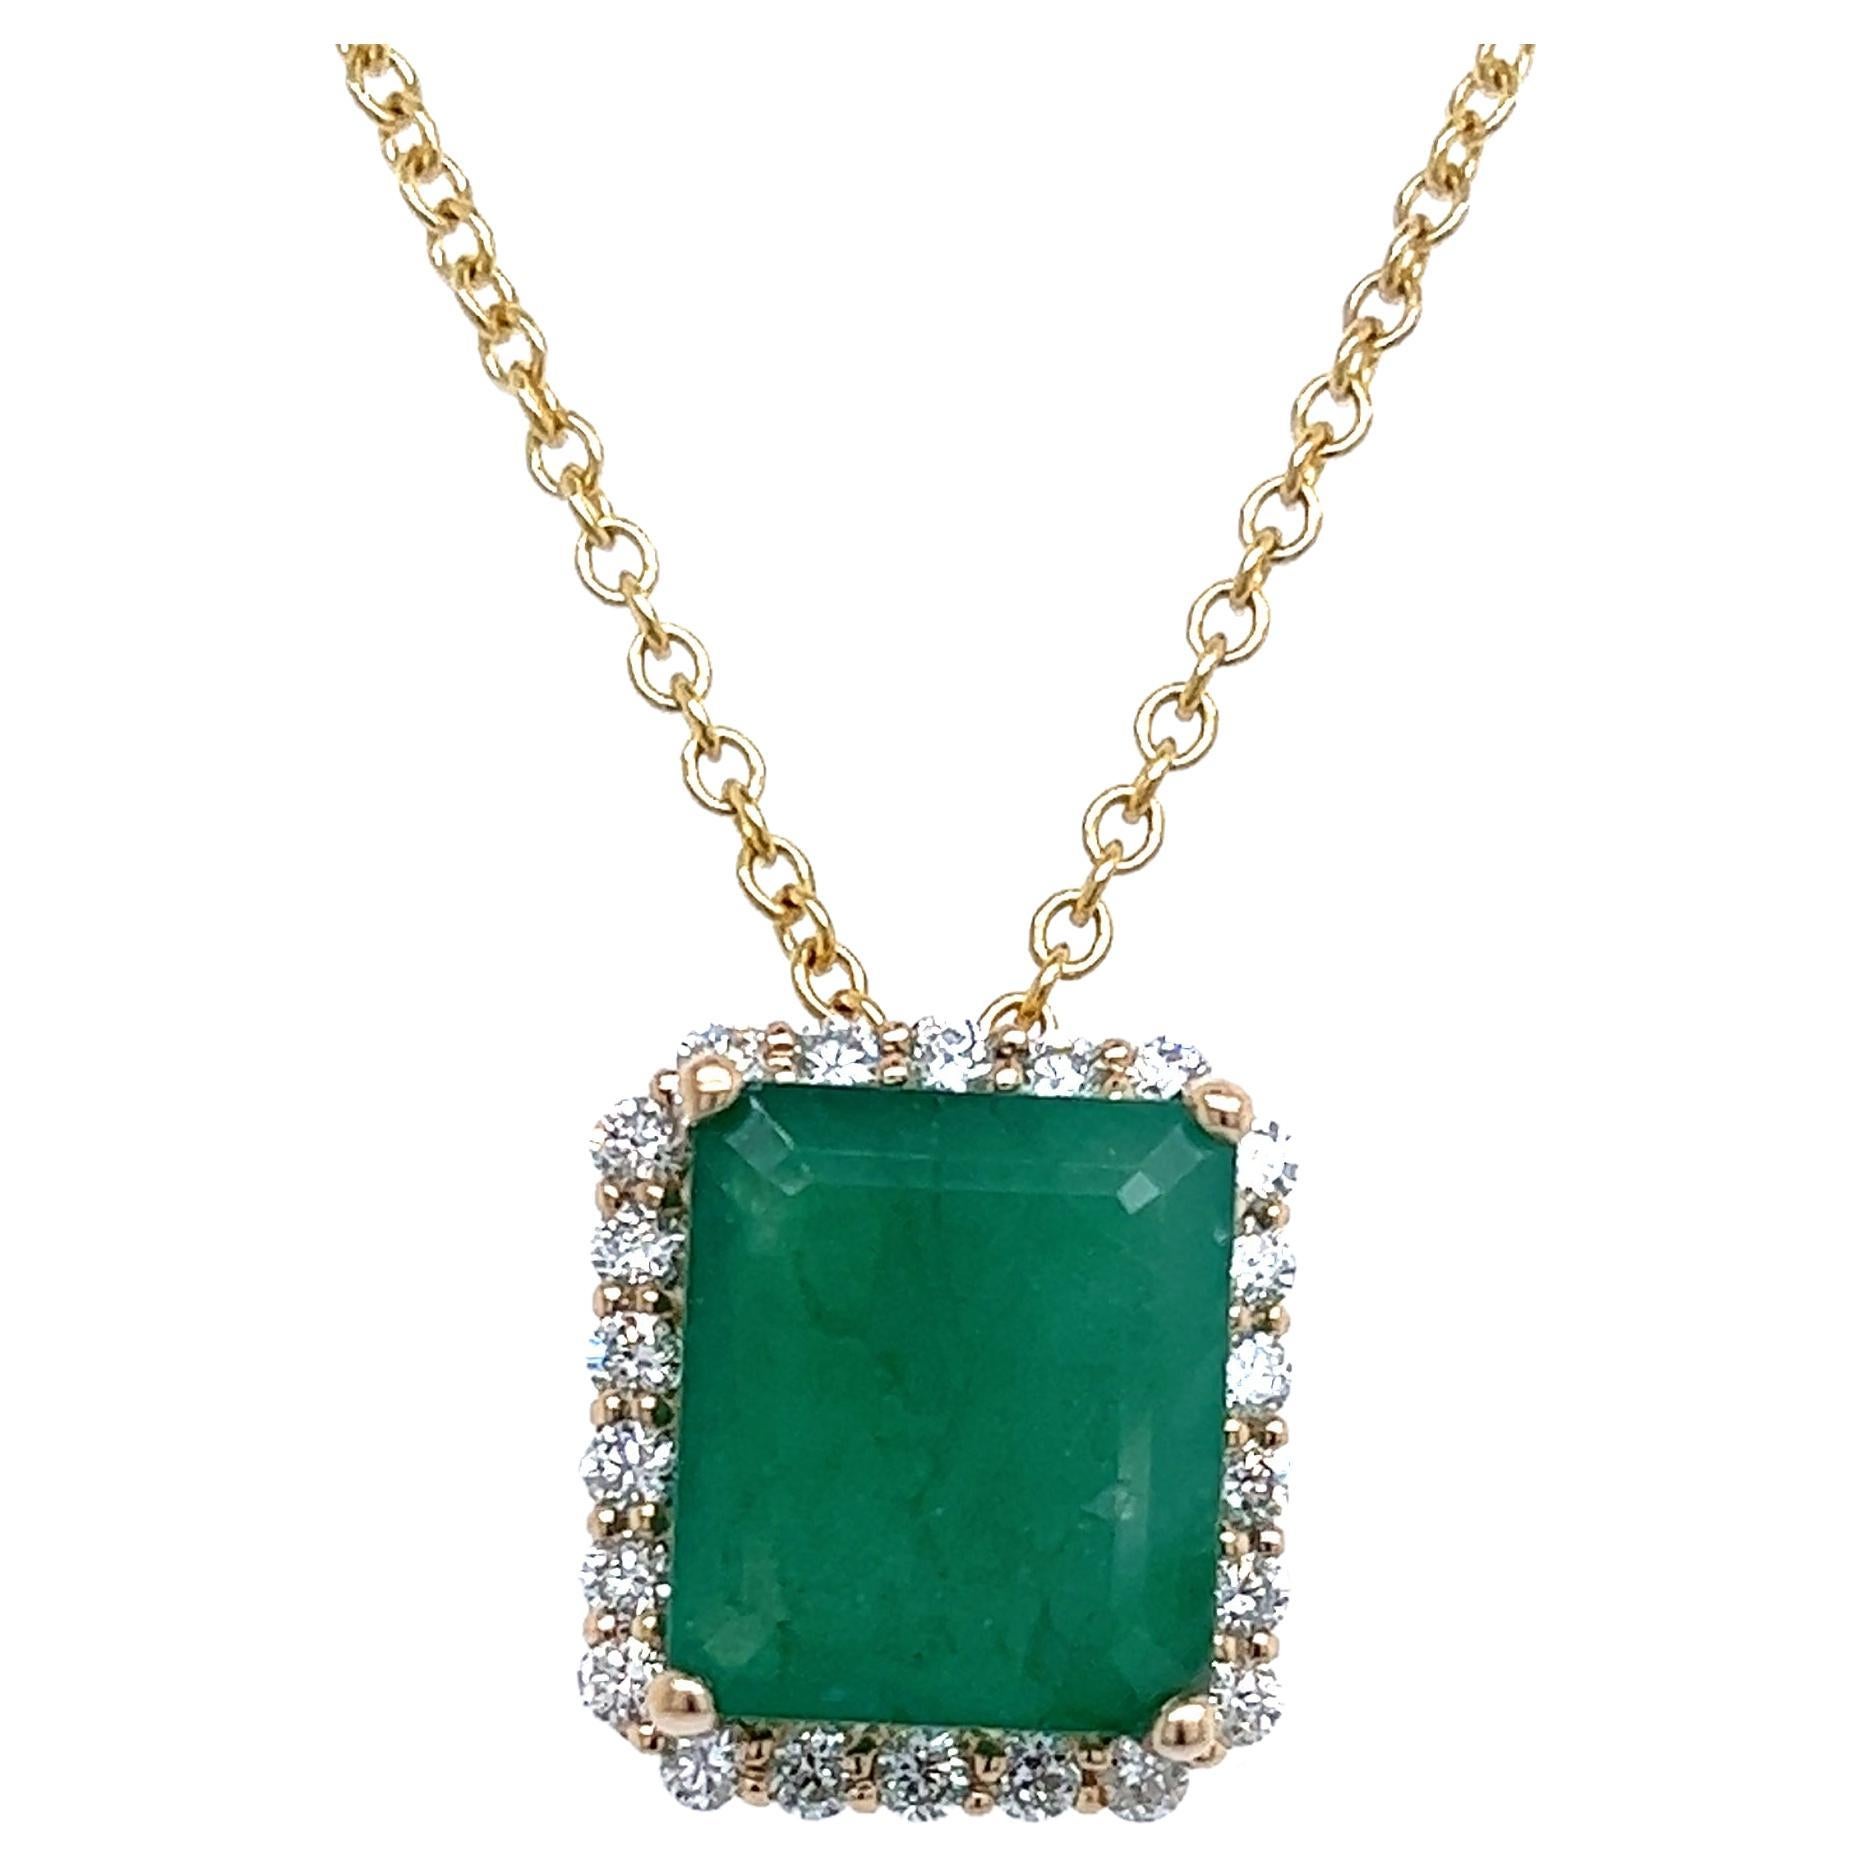 Natural Emerald Diamond Pendant Necklace 14k Yellow Gold 5.05 TCW Certified